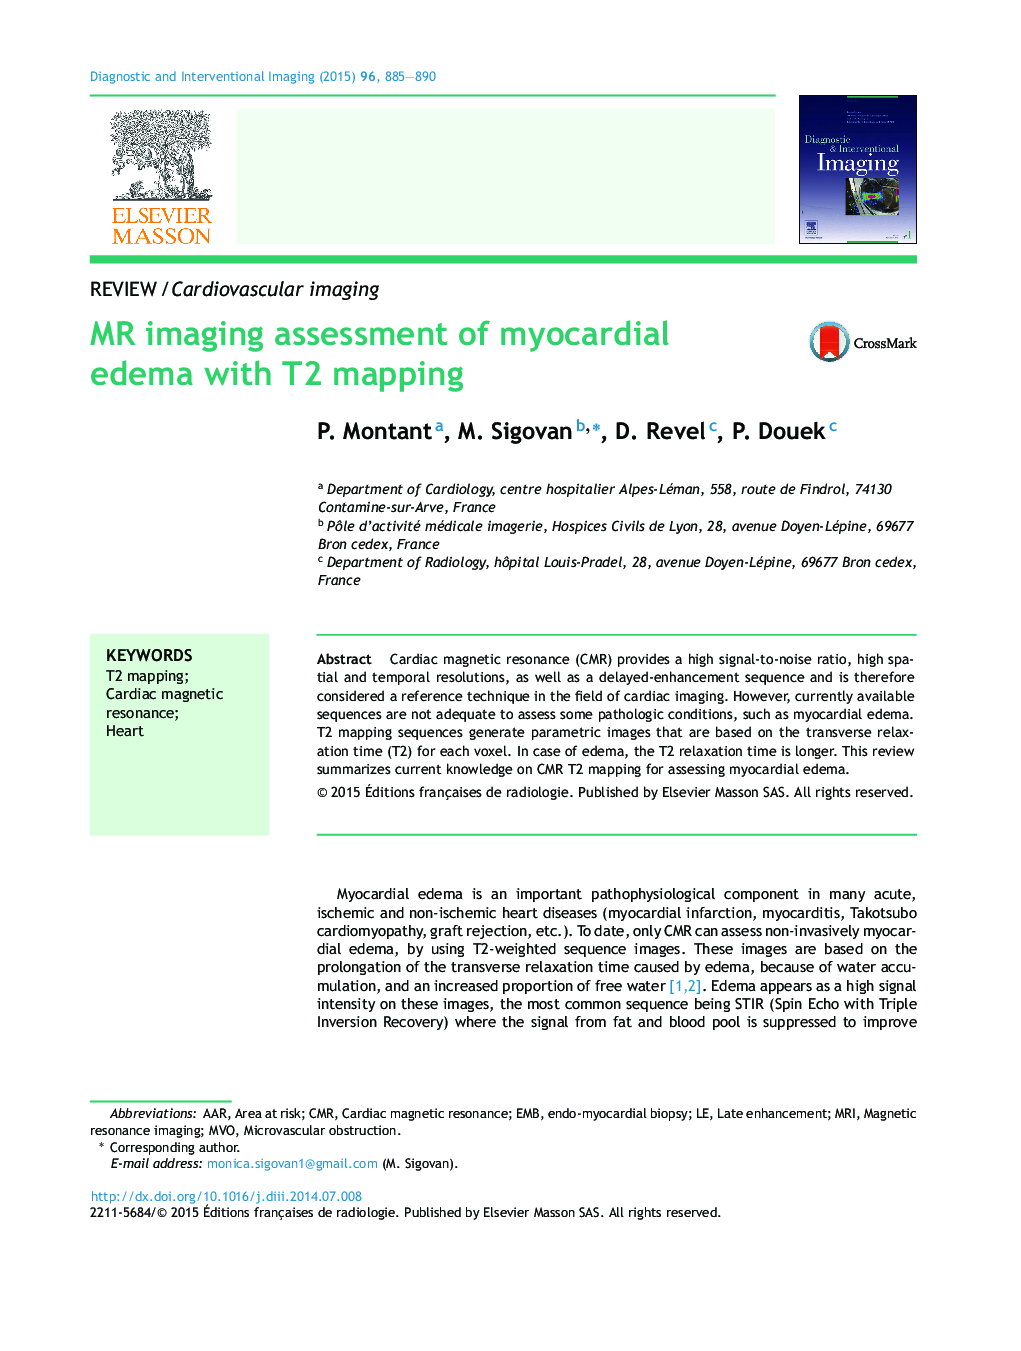 MR imaging assessment of myocardial edema with T2 mapping